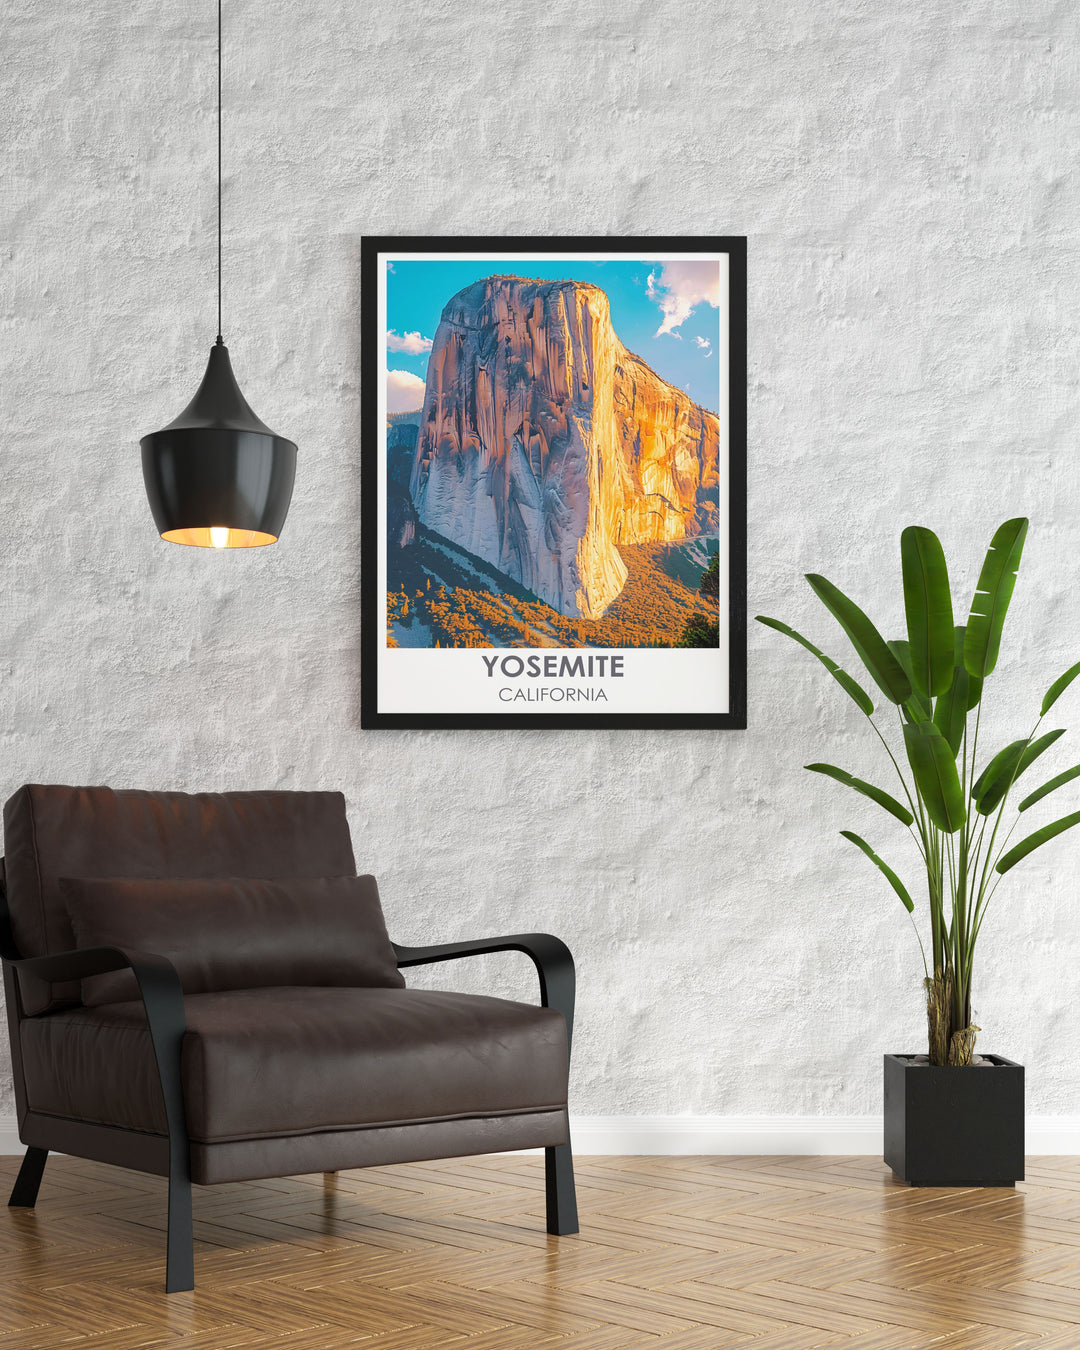 This travel print of Yosemite National Park depicts the Pacific Crest Trail, offering a glimpse into the diverse ecosystems and breathtaking views that hikers experience along this renowned trail.